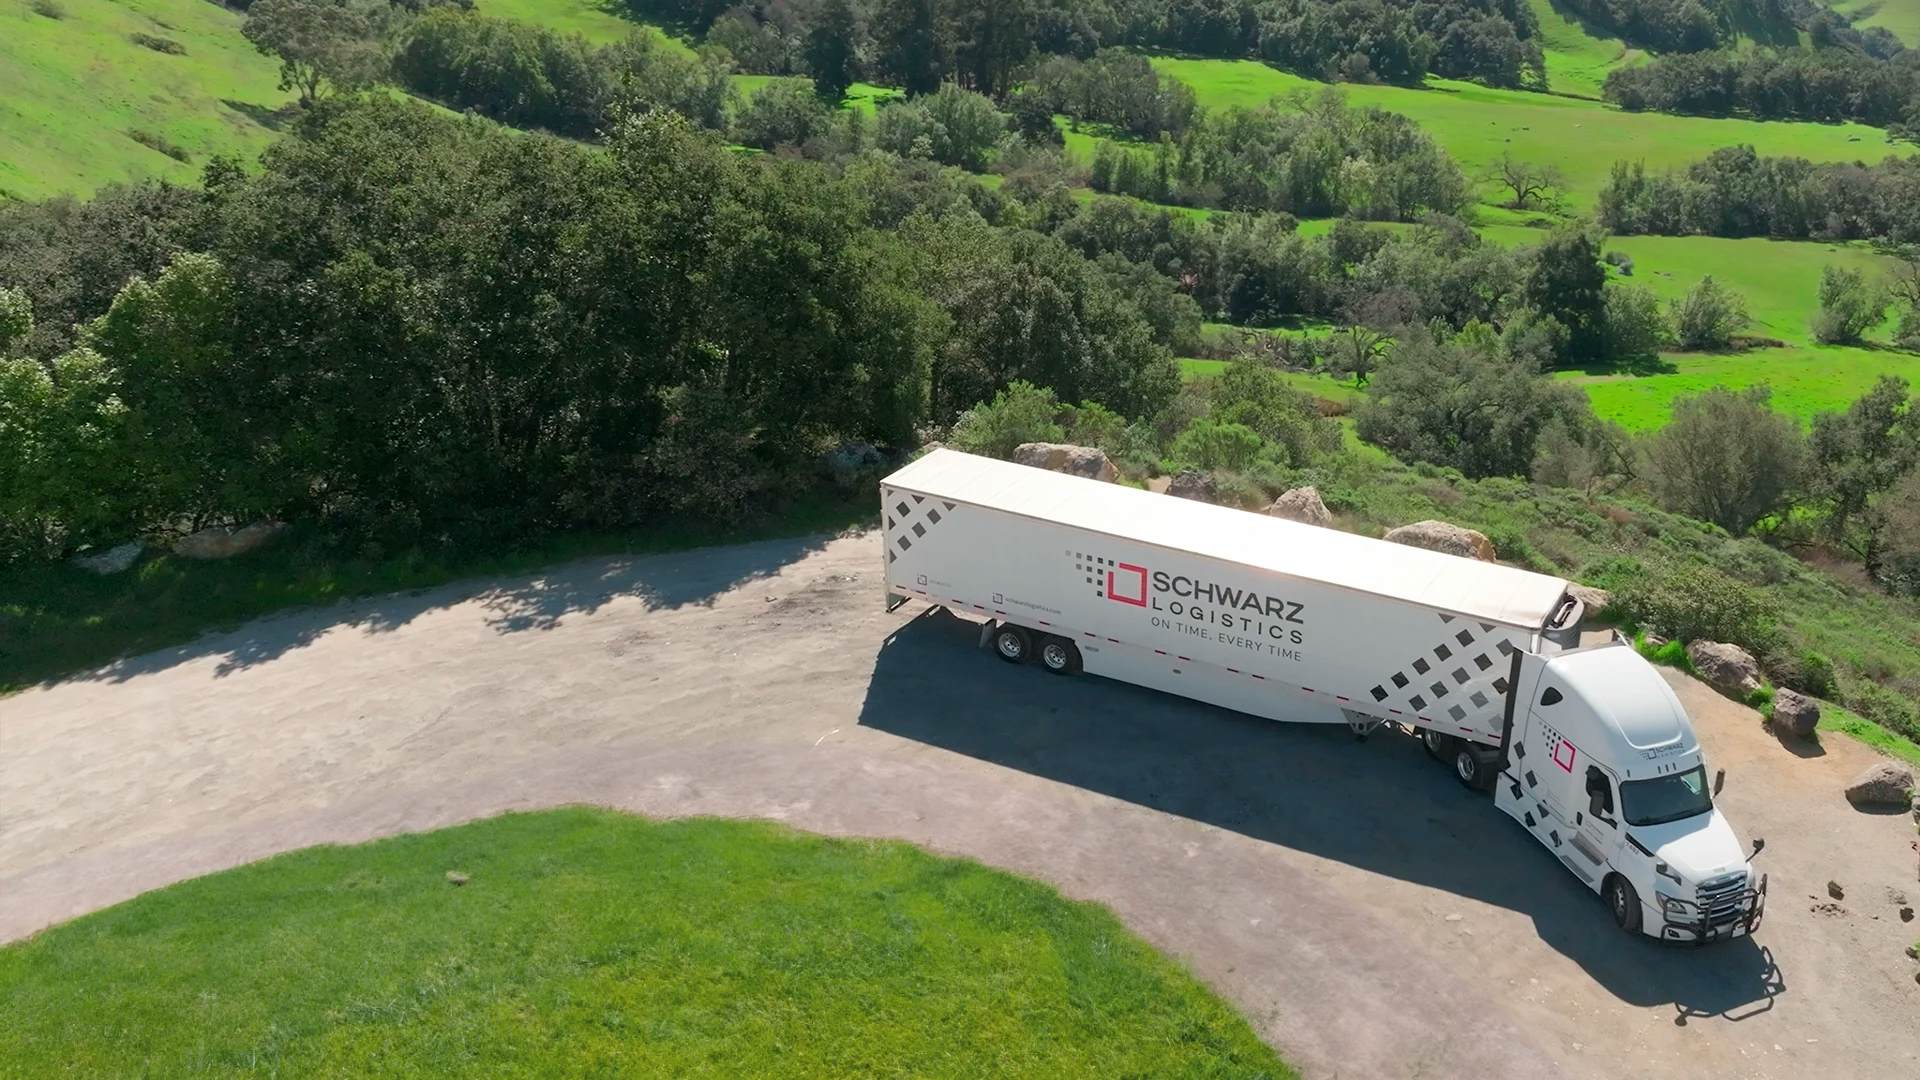 Aerial view of a white semi-truck with "SCHWARZ LOGISTICS" branding on the trailer parked on a gravel lot, surrounded by lush greenery and hills.